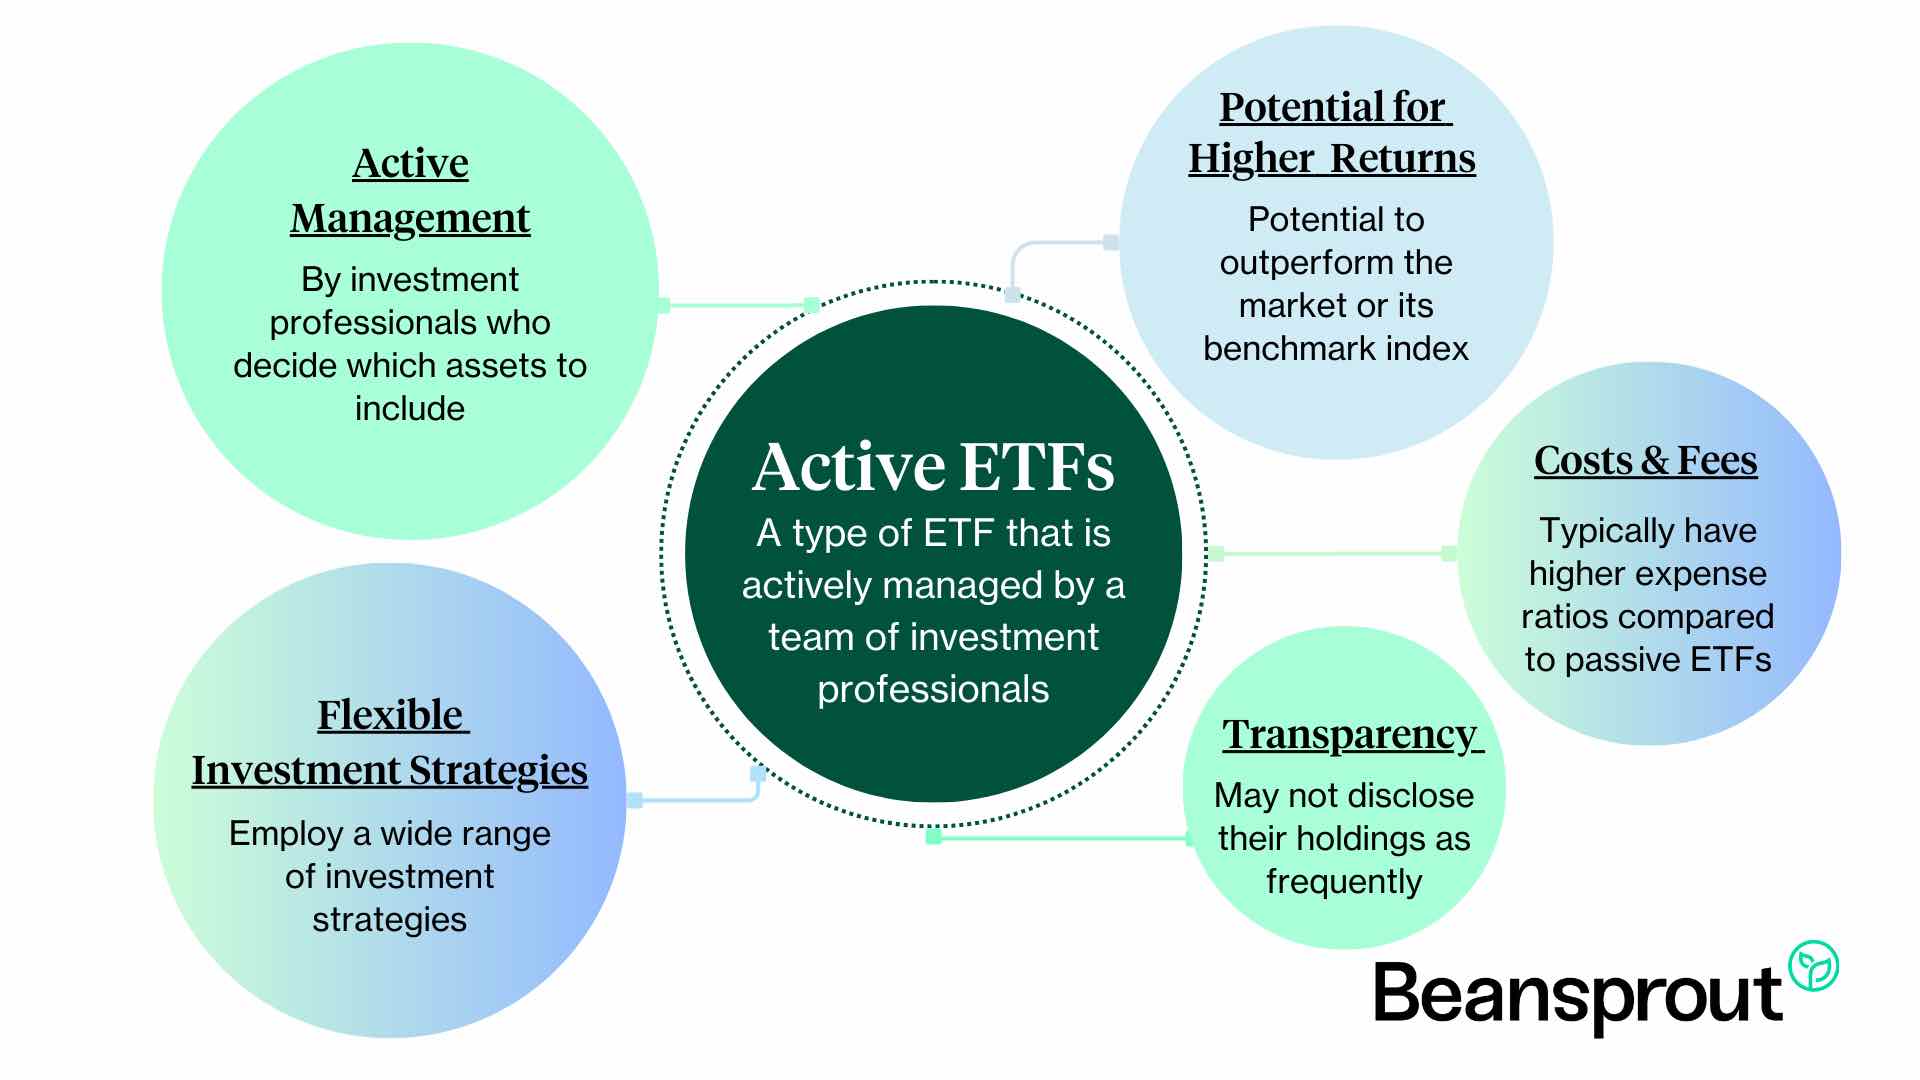 What are Active ETFs